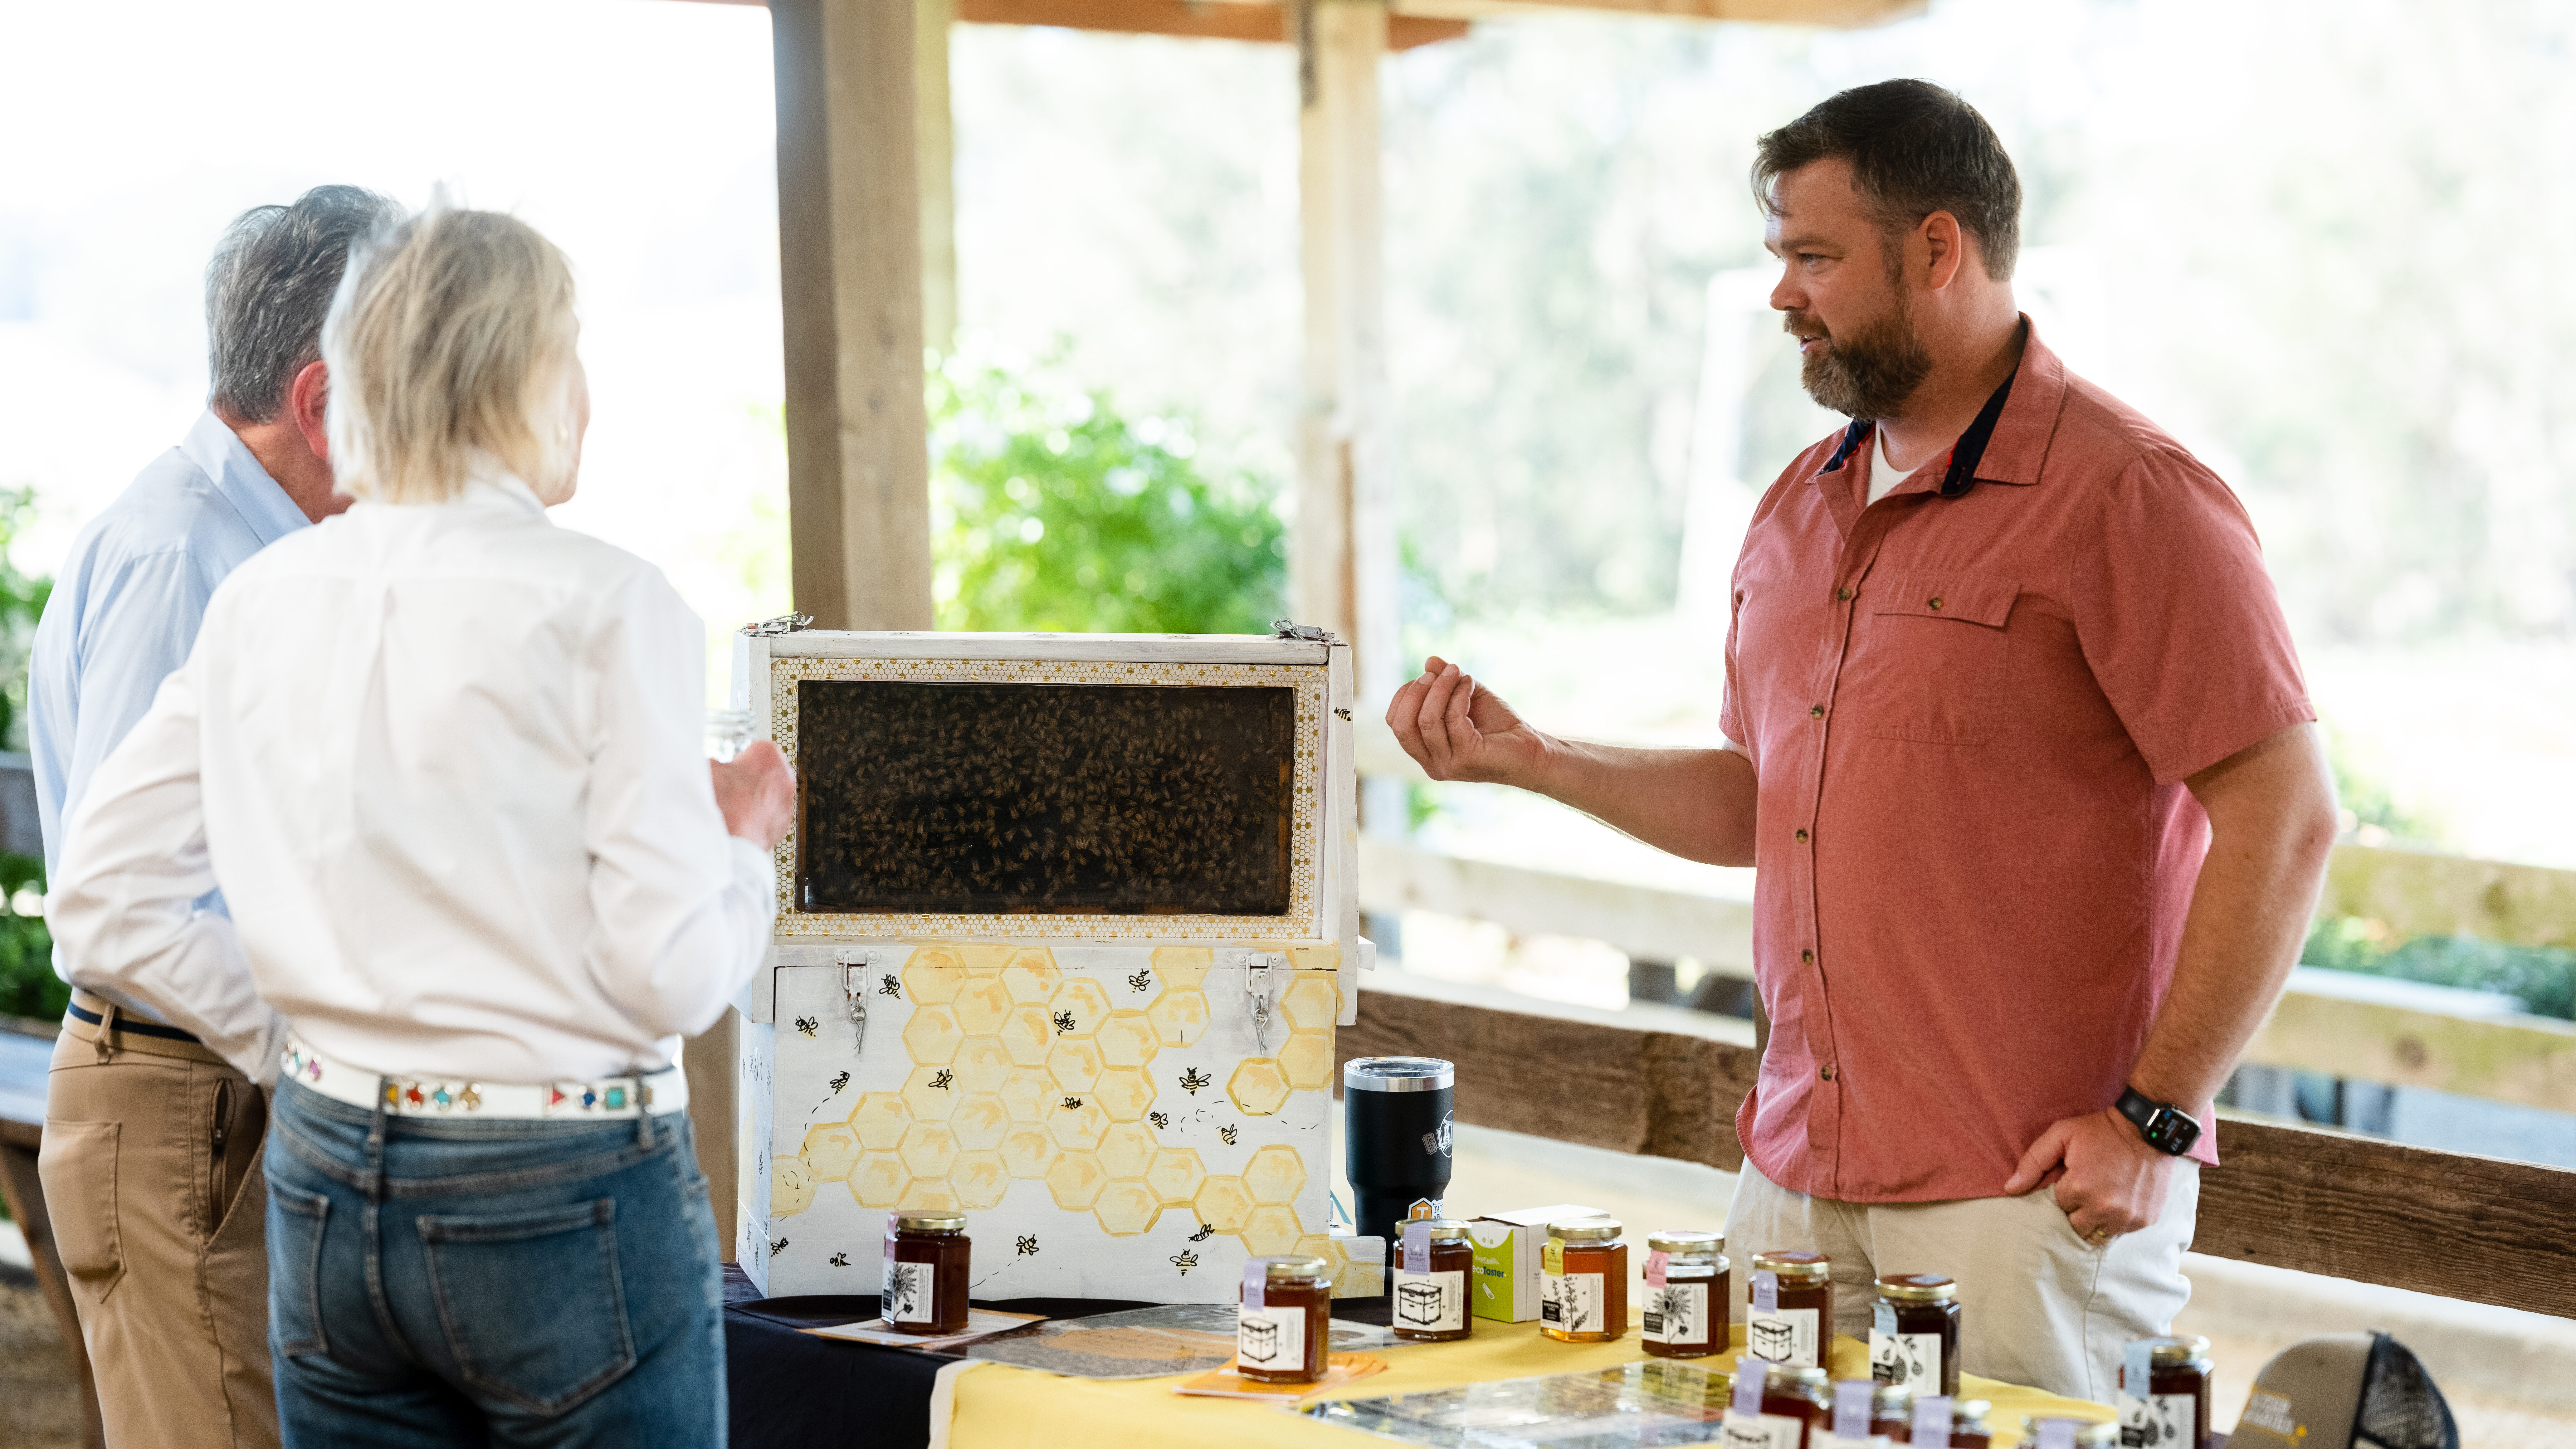 A representative from Sola Bee Honey stands at a booth with jars of honey and a beehive box, talking to two attendees. Photo by Paige Green Photography for MALT.